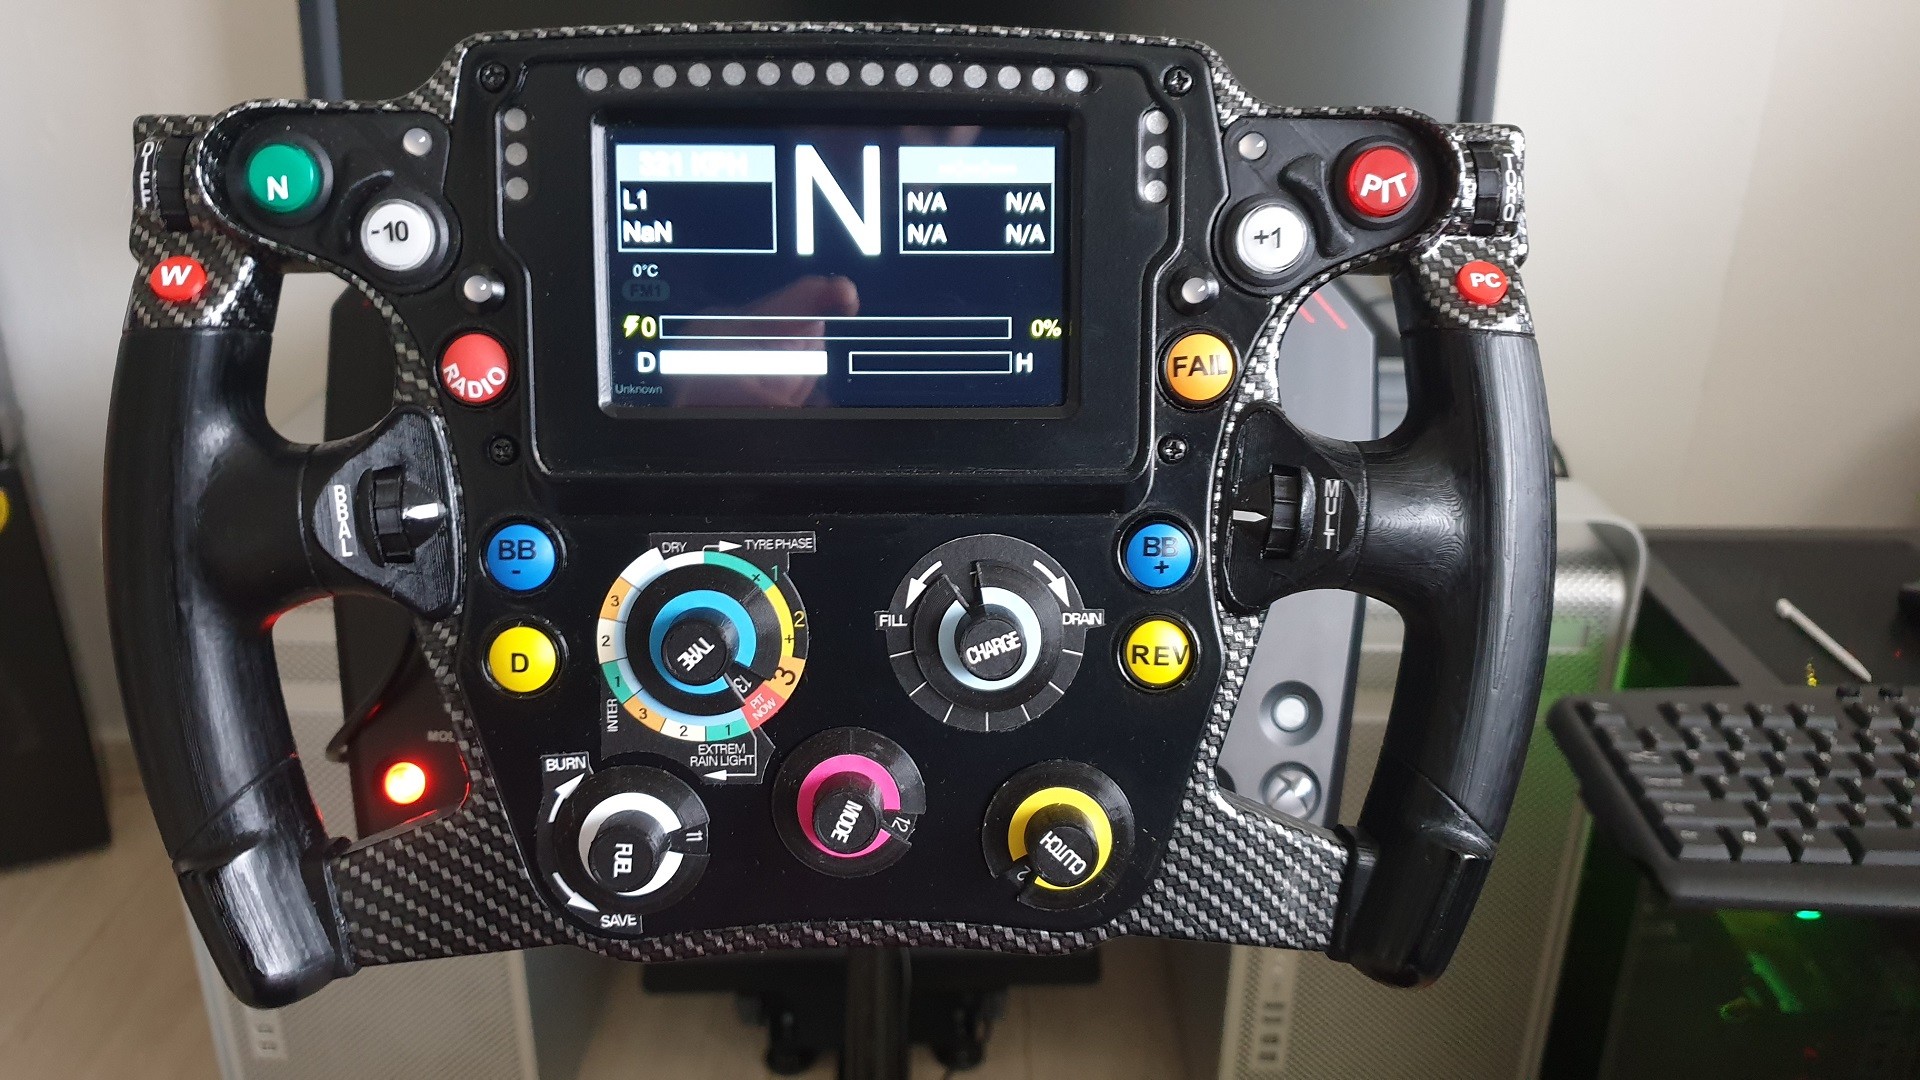 Elektor Nederland Ar Twitter Thrustmaster Ts300 Based Sf1000 Steering Wheel Emulator By Logic Something Do You Love Formula 1 Racing Now You Can Build Your Own Max Verstappen Sw16 Steering Wheel T Co Gauzmiuvmv